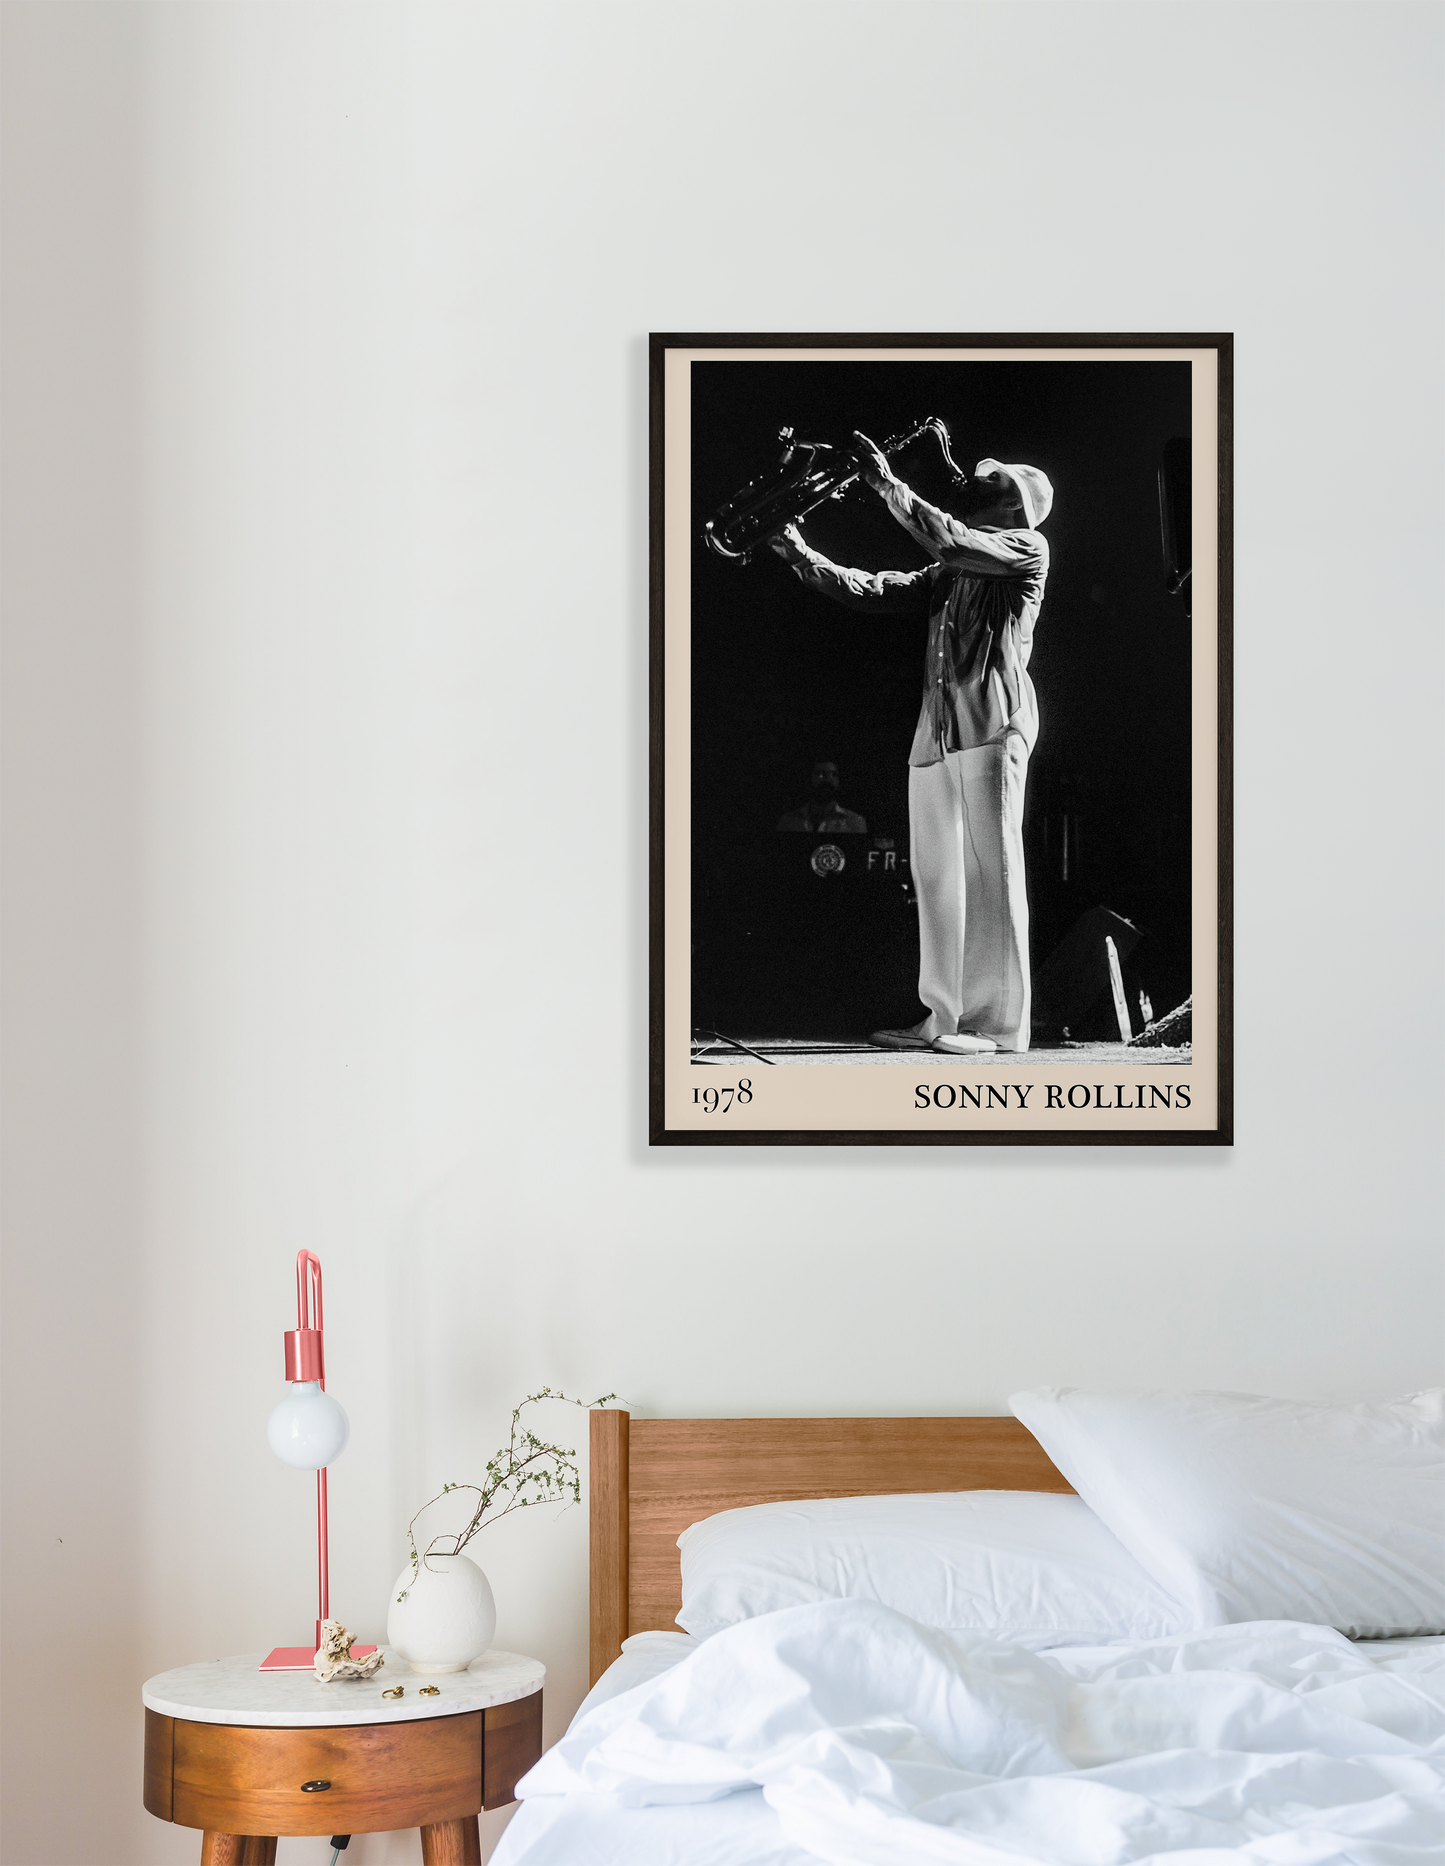 1978 photograph of Sonny Rollins playing the saxophone, transformed into a stylish black-framed jazz poster hanging on a white bedroom wall